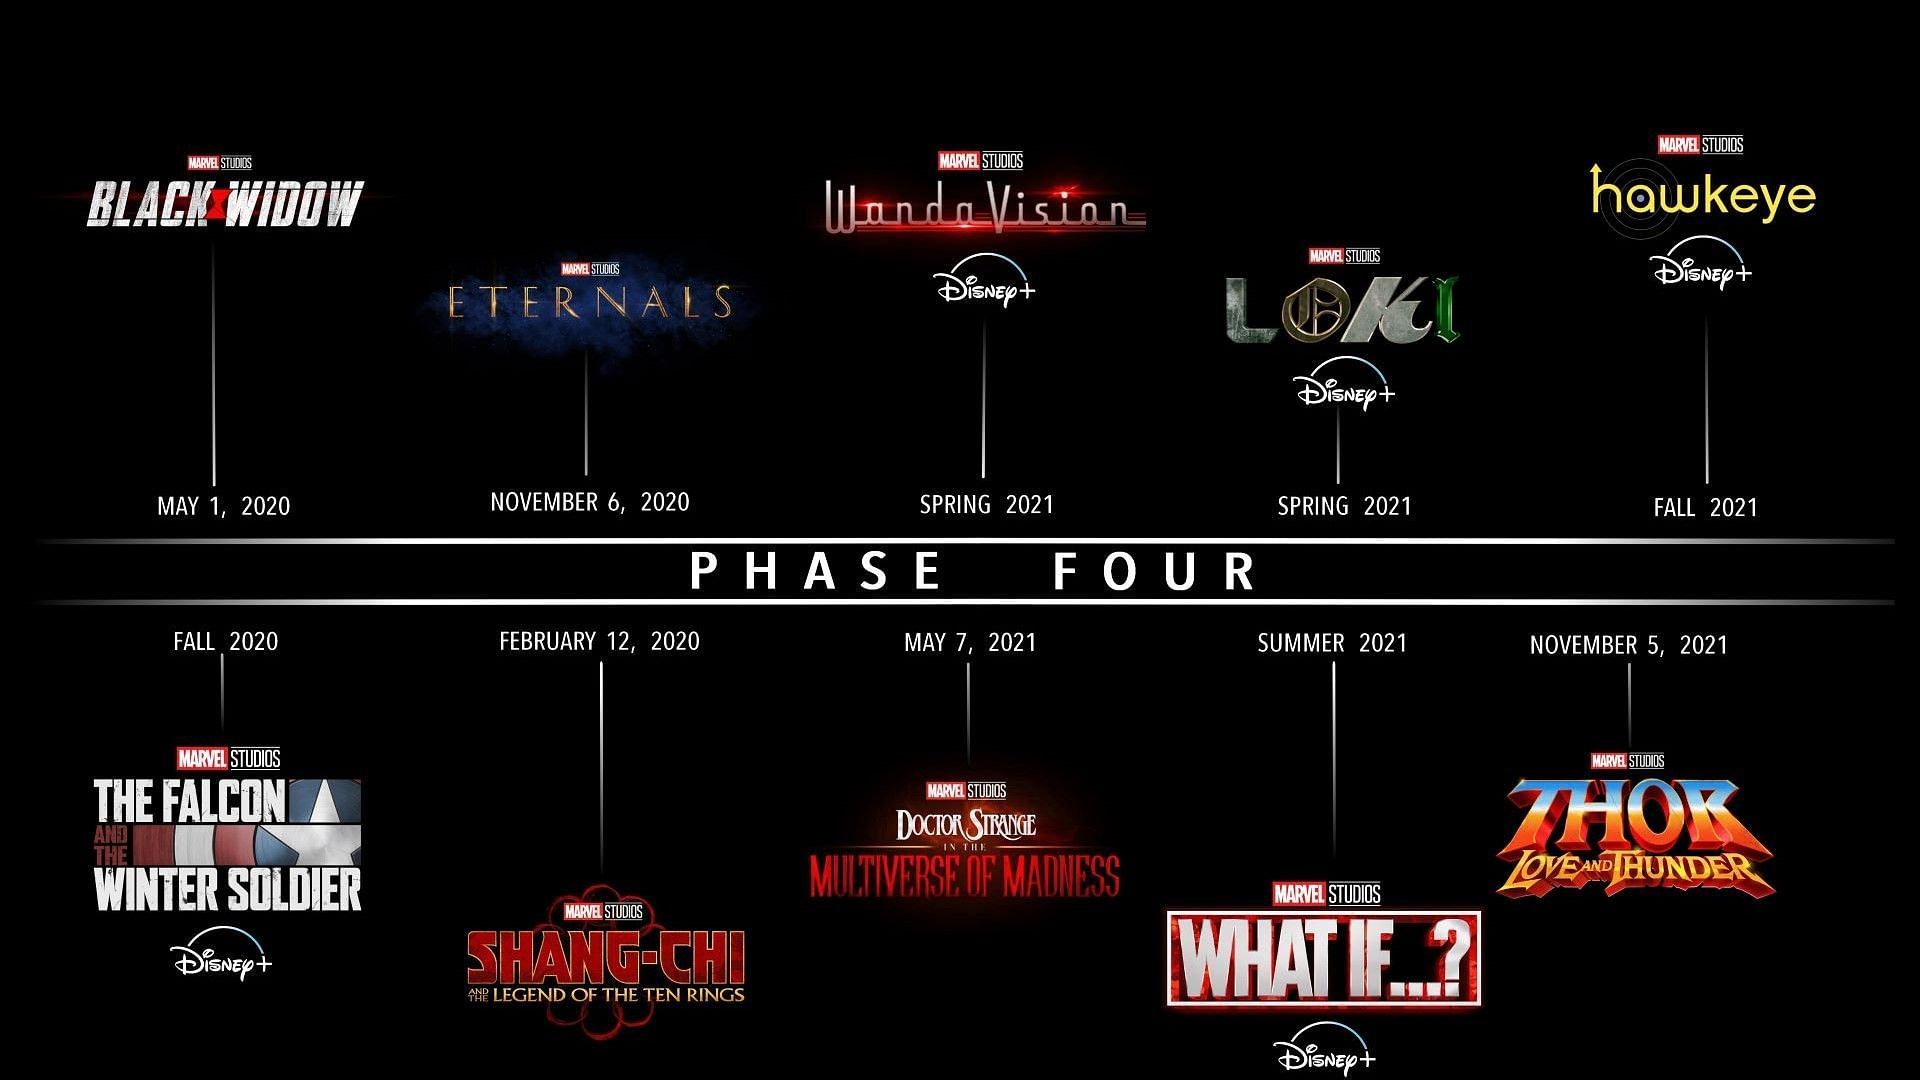 Why many Marvel fans disliked Phase 4 of the MCU